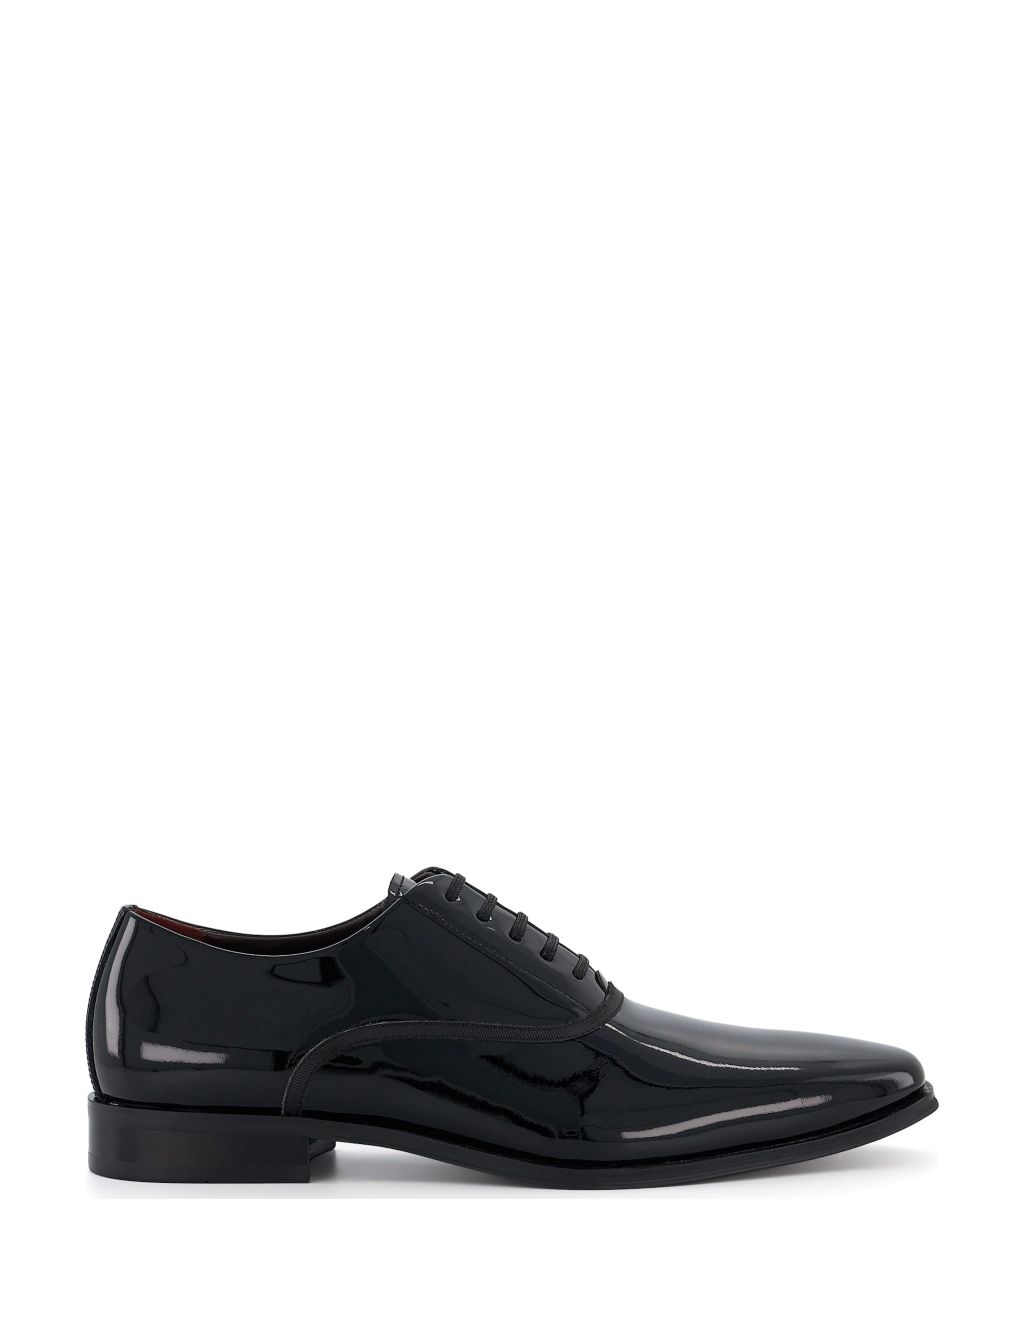 Wide Fit Leather Oxford Shoes 3 of 5